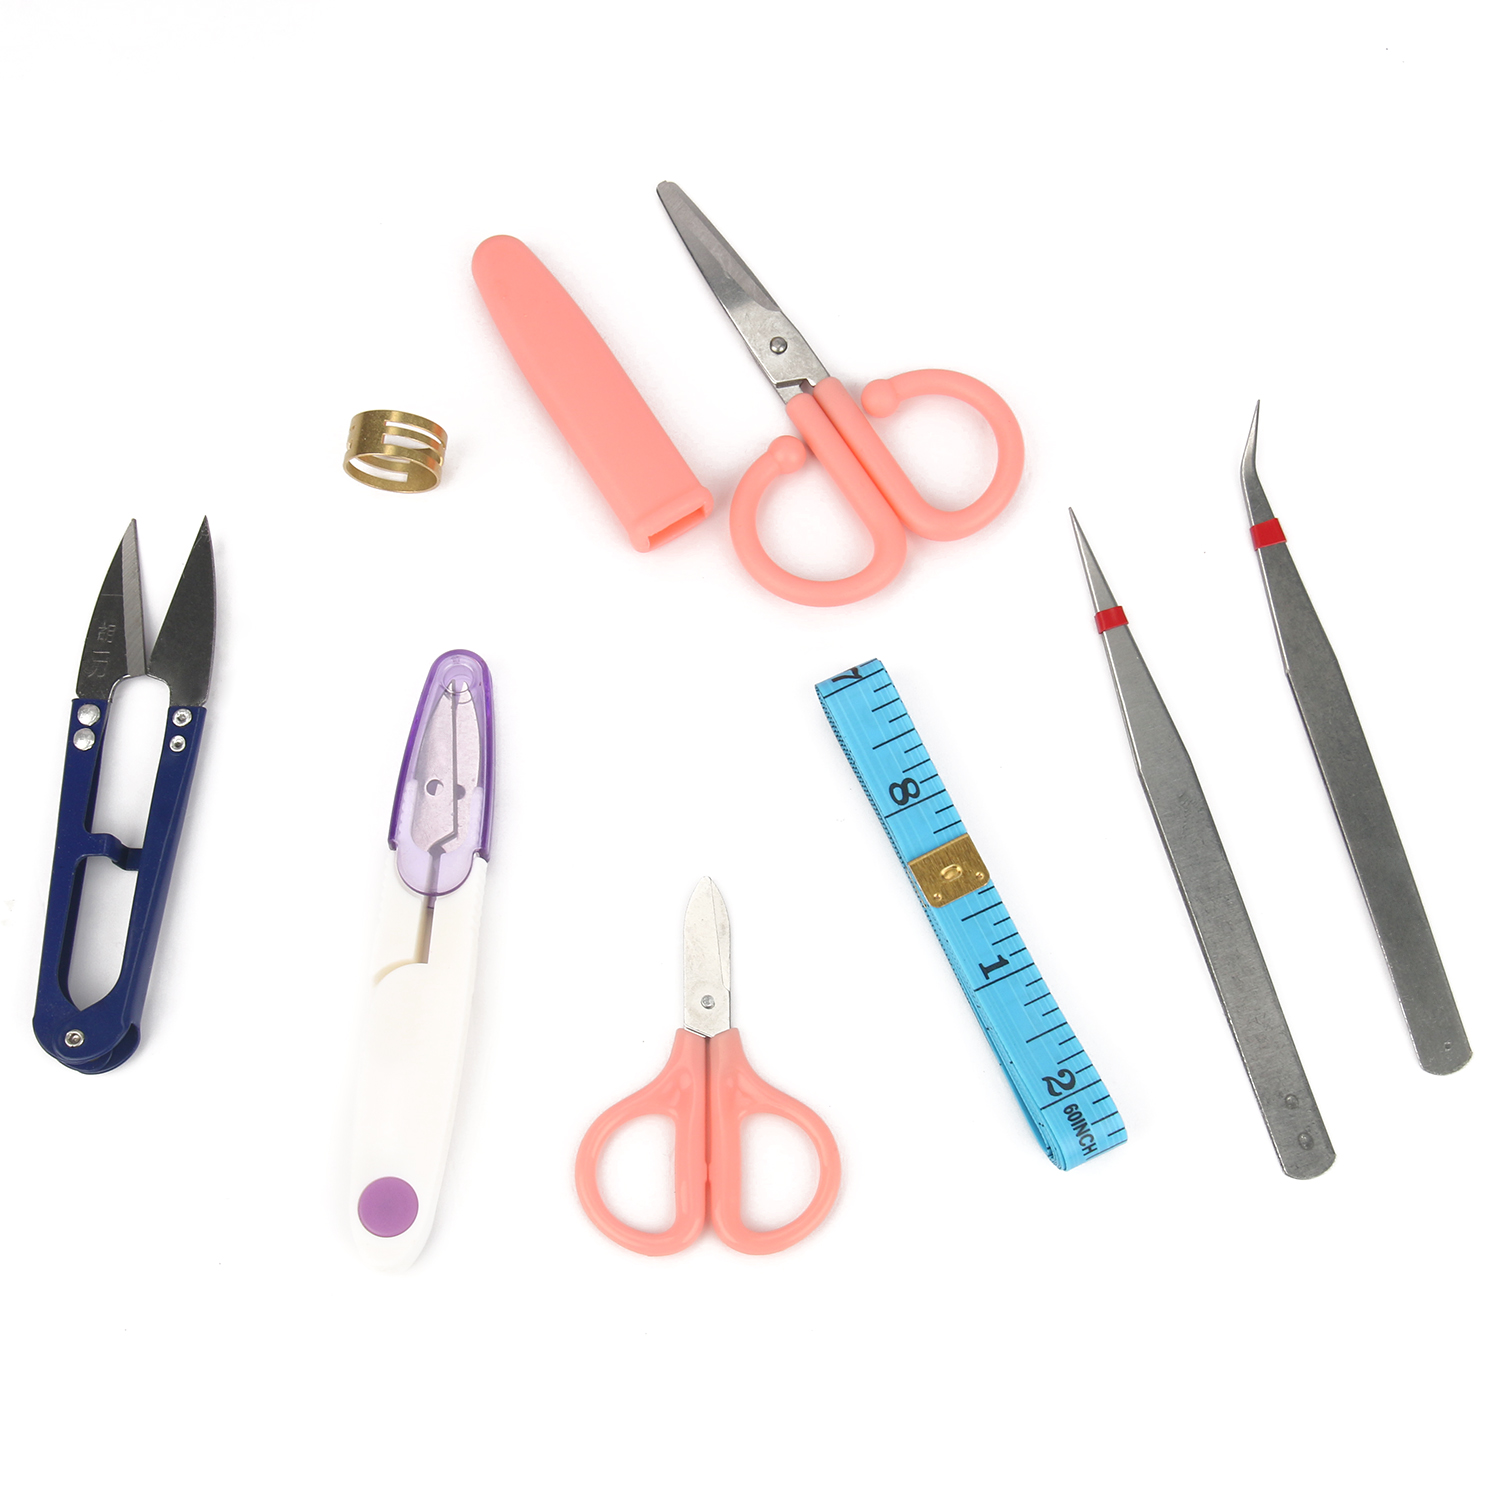 Jewelry Making Tool Kits Pliers Set With Round Nose Plier Side Cutting Pliers Wire Cutter Scissor Elastic Thread Tweezers